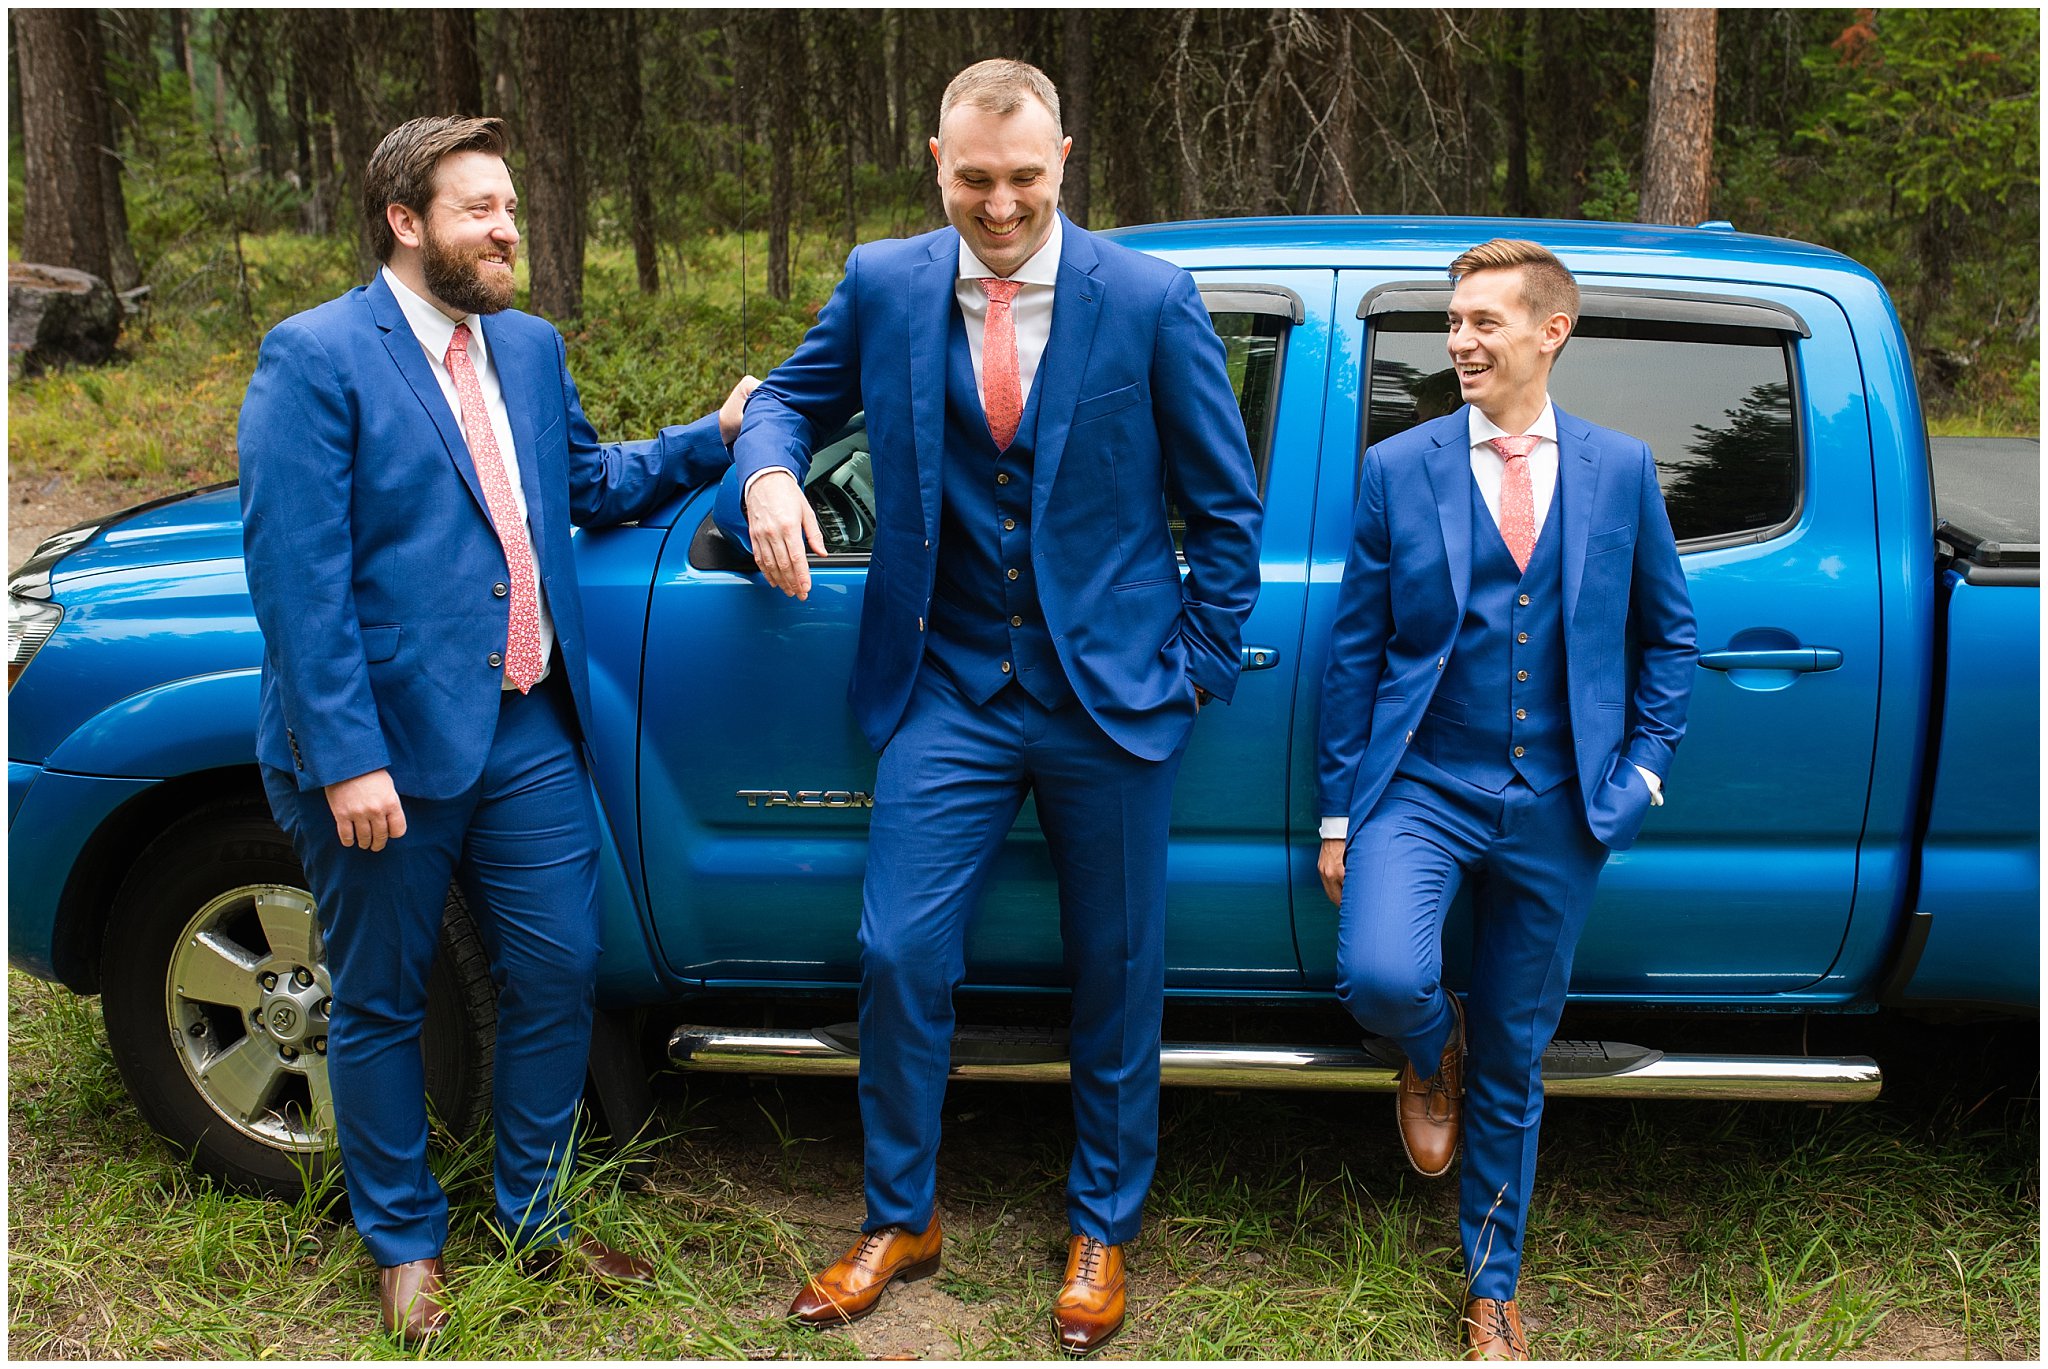 Groom and groomsmen in blue suits with truck | Mountainside Weddings Kalispell Montana Destination Wedding | Jessie and Dallin Photography